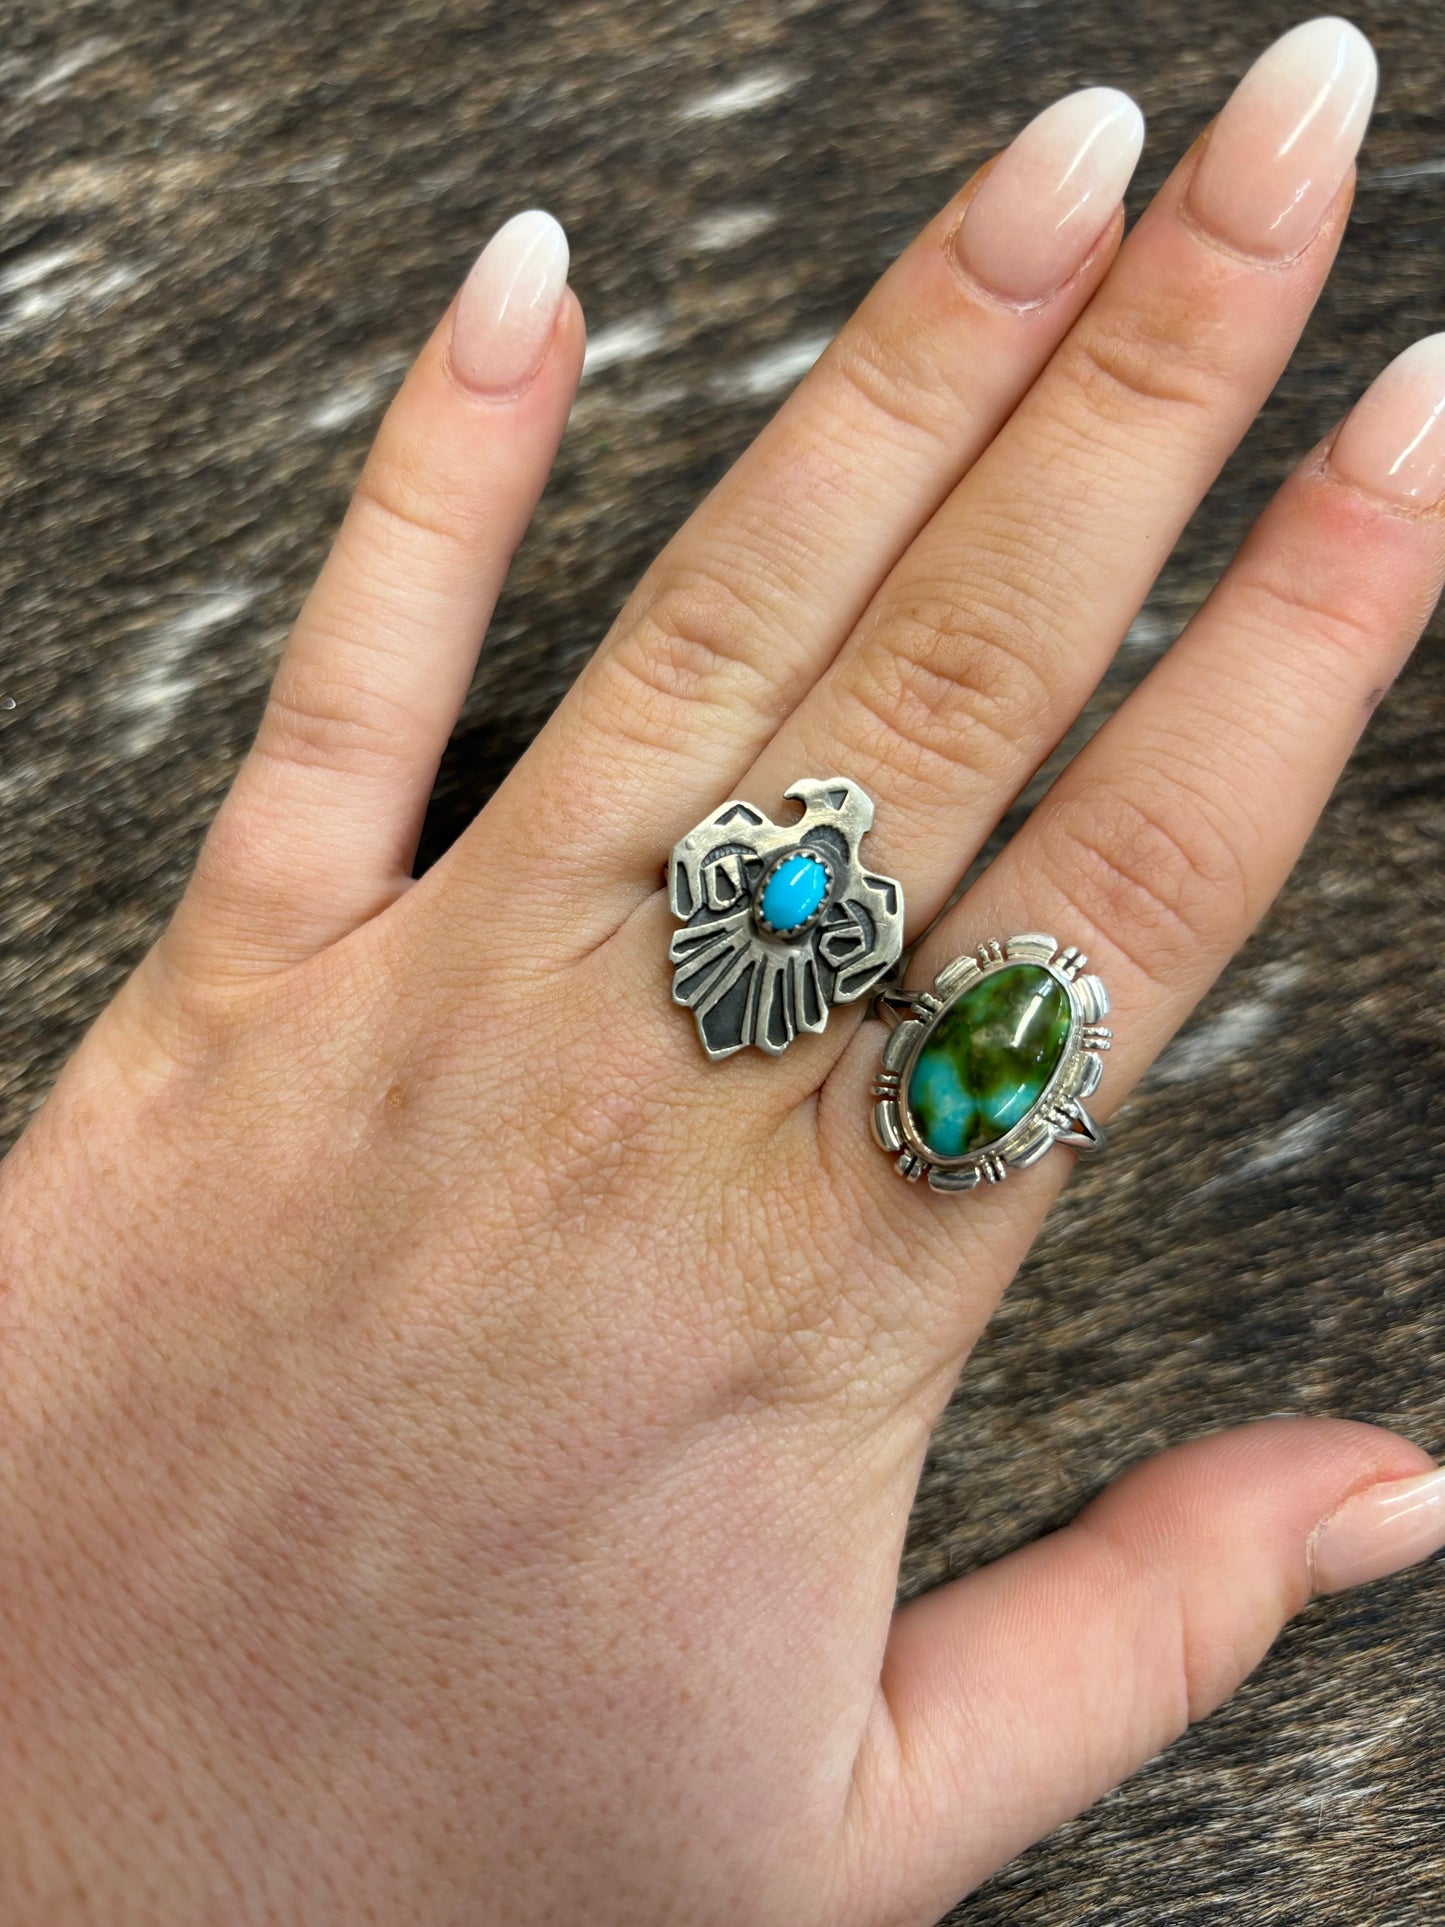 The Authentic Thunderbird Turquoise Ring - size 8